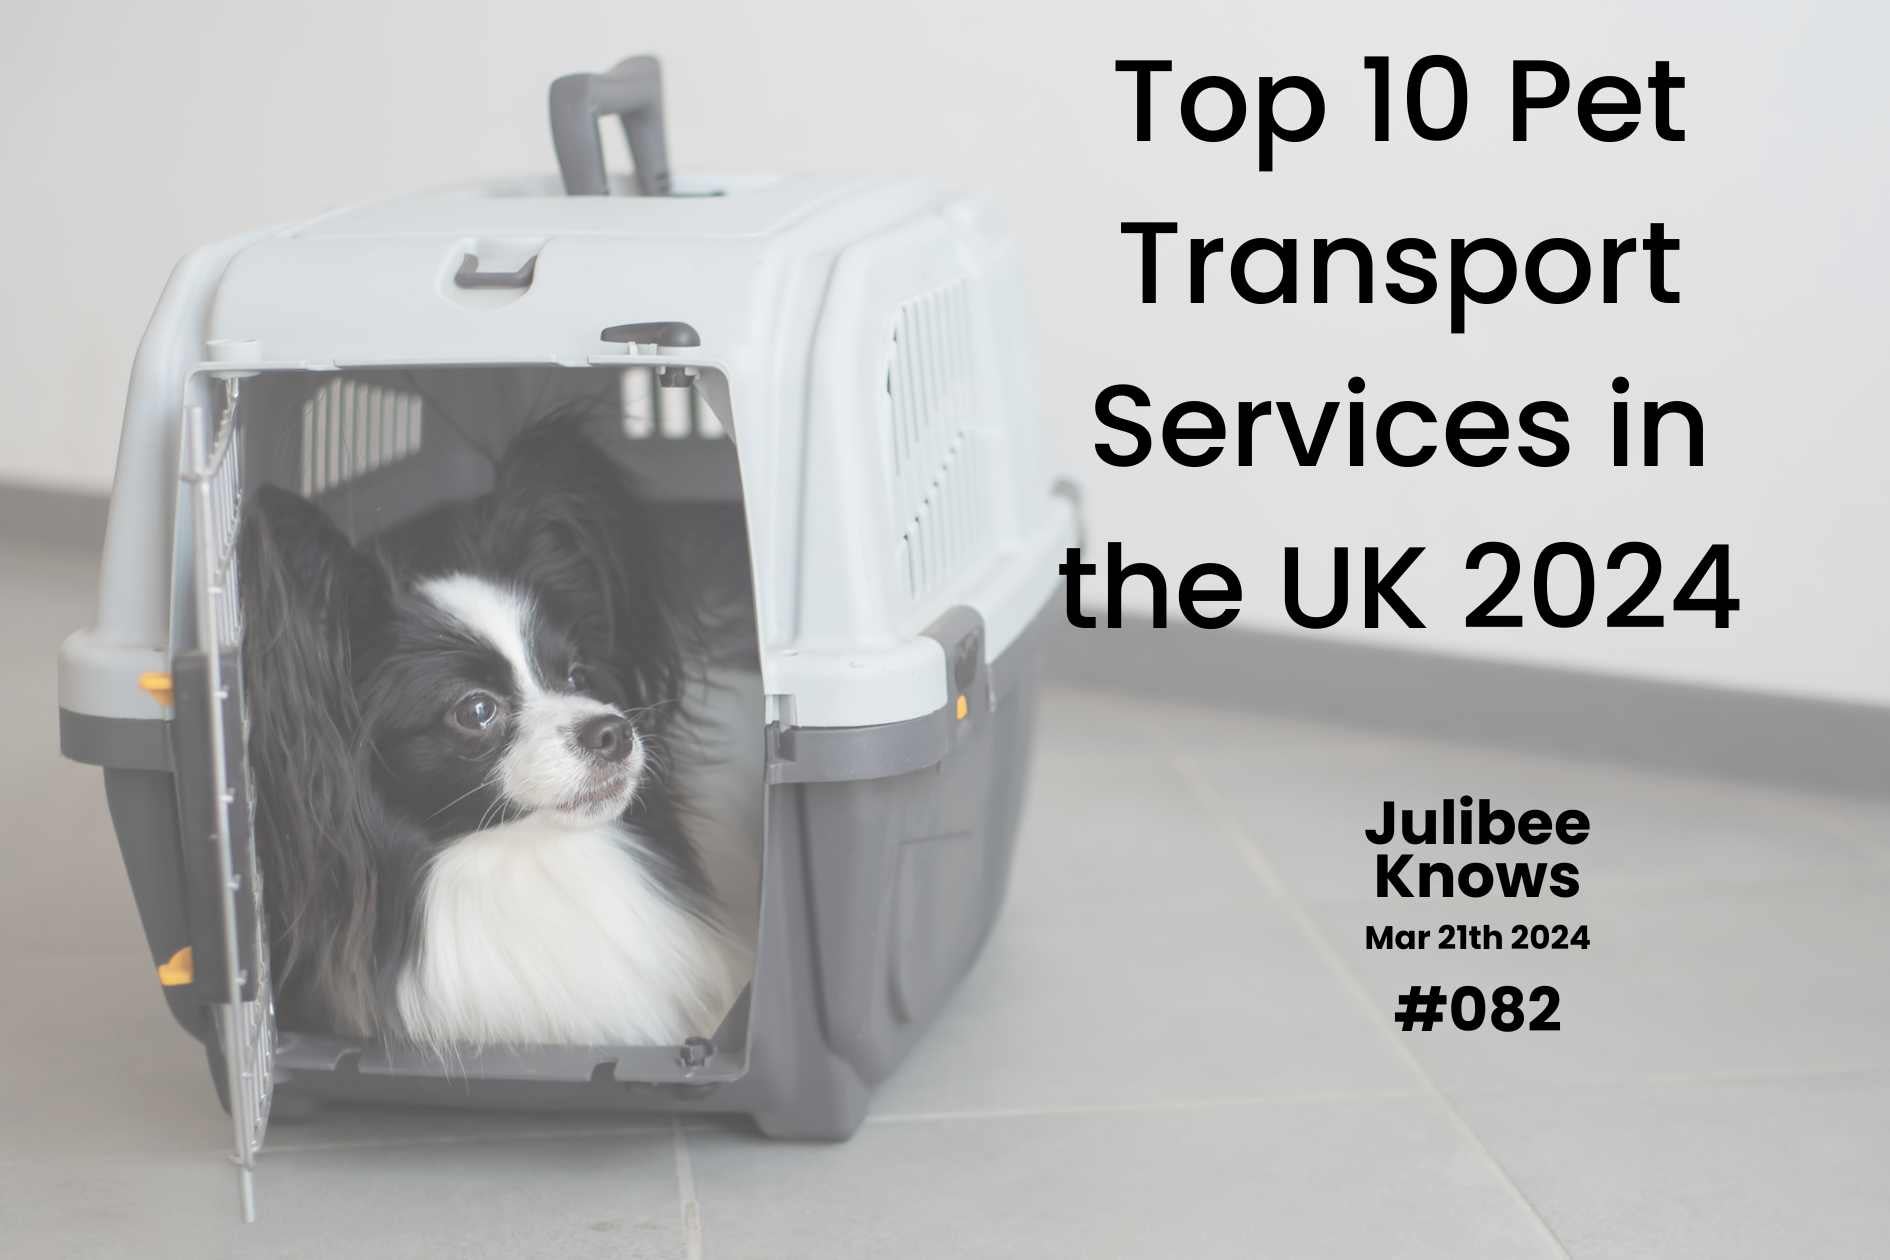 Top 10 Pet Transport Services in the UK 2024